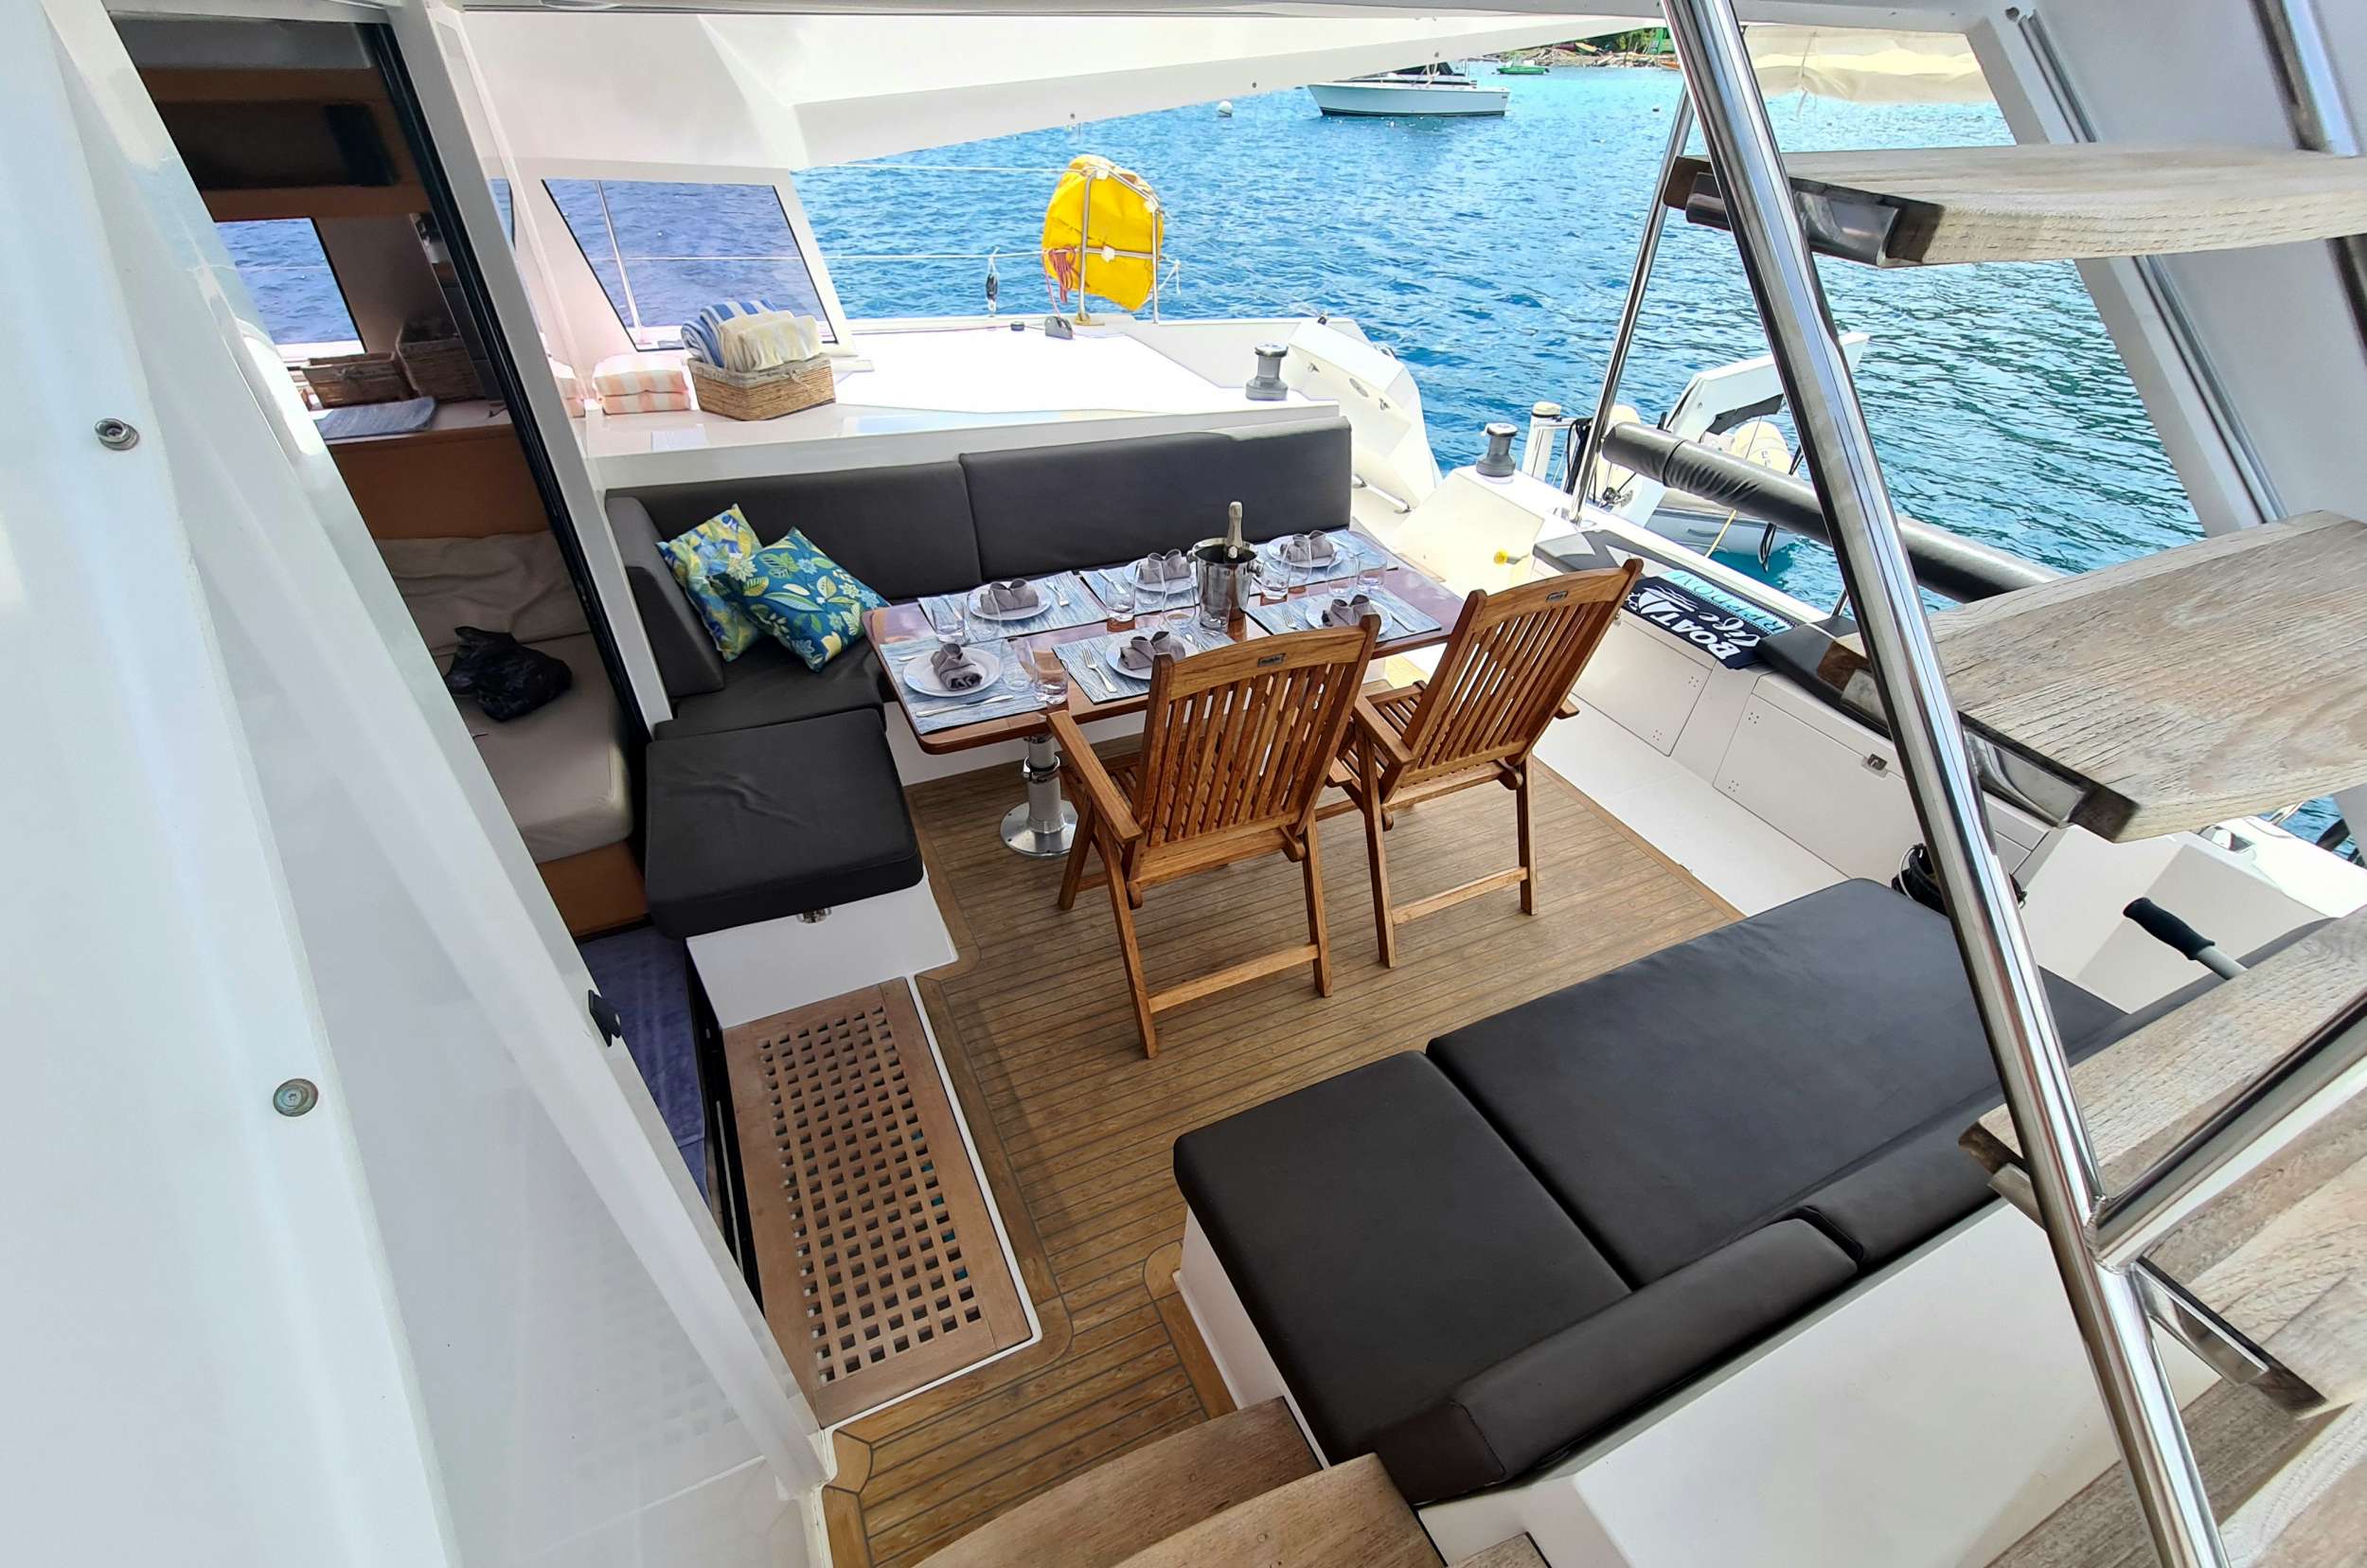 Freedom - Yacht Charter St Vincent & Boat hire in Caribbean 2